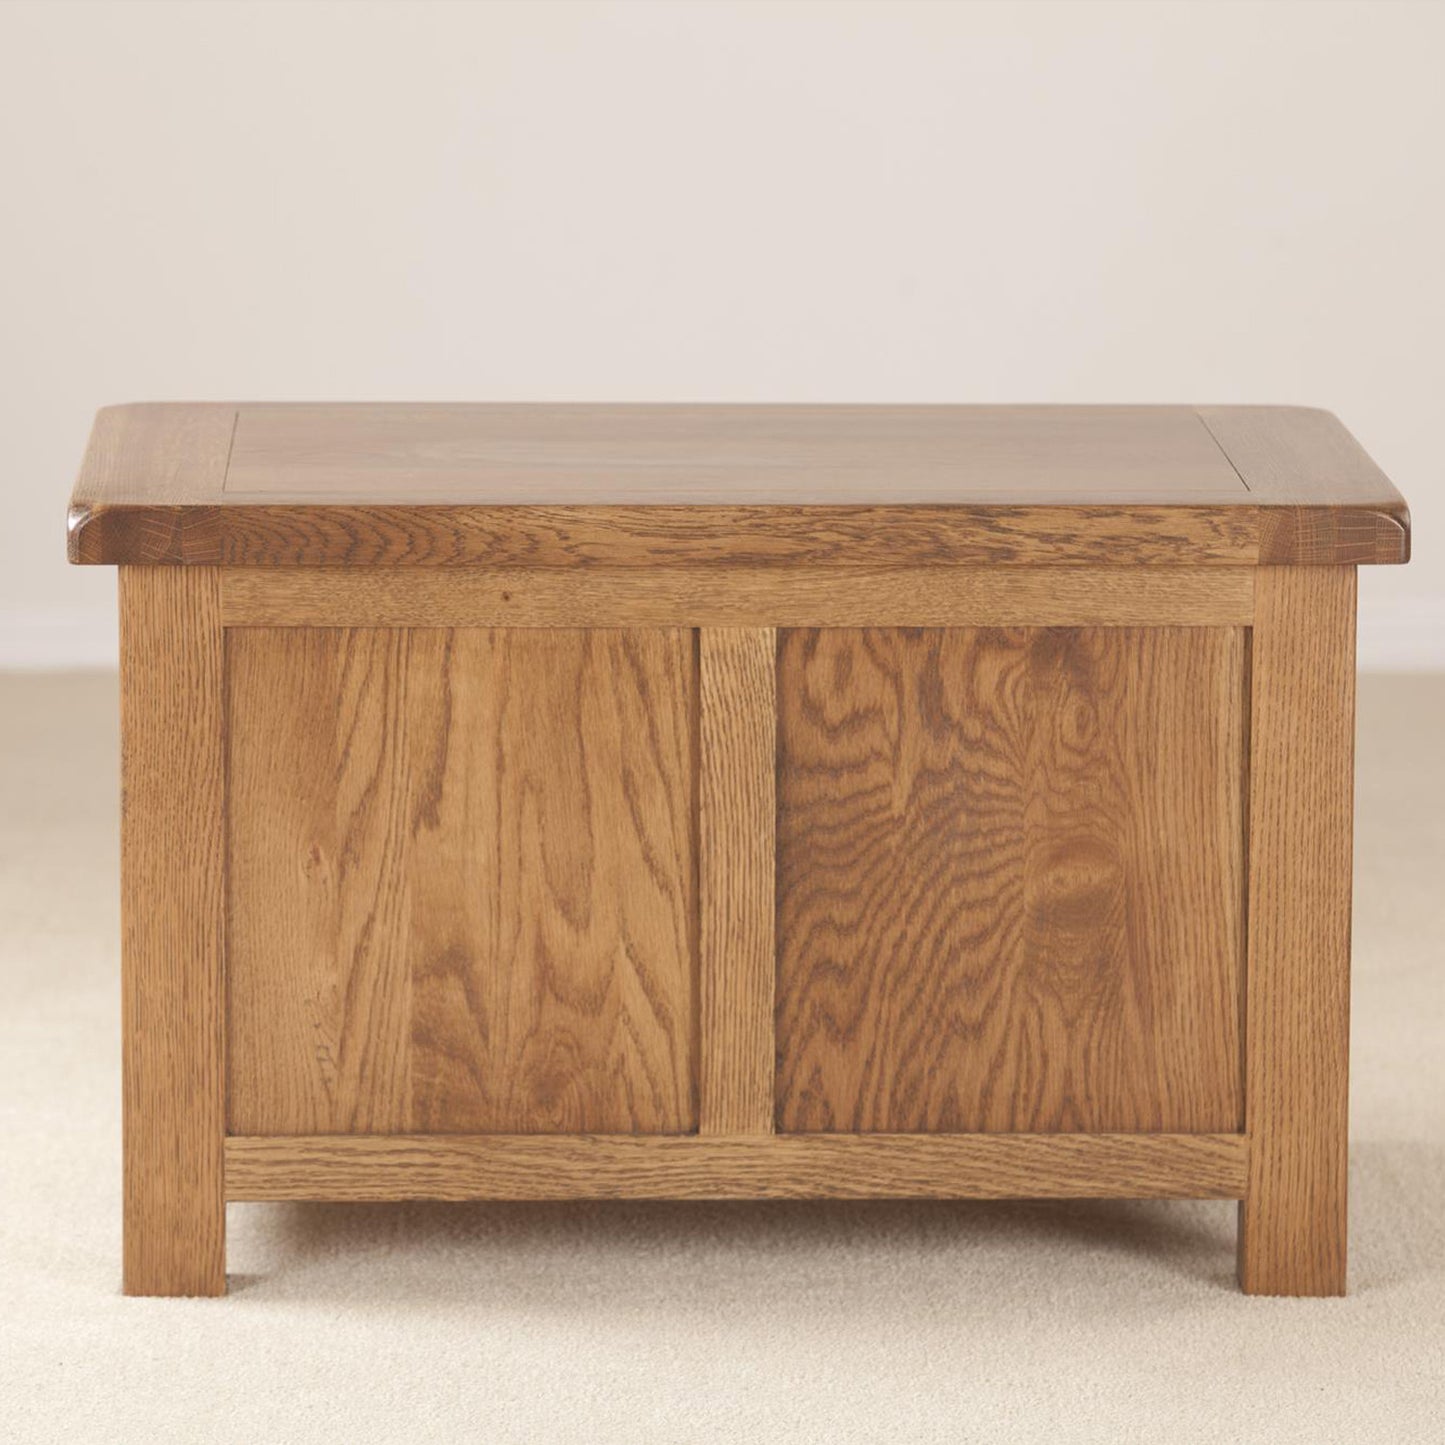 Auvergne Solid Oak Blanket Box - Small - Better Furniture Norwich & Great Yarmouth